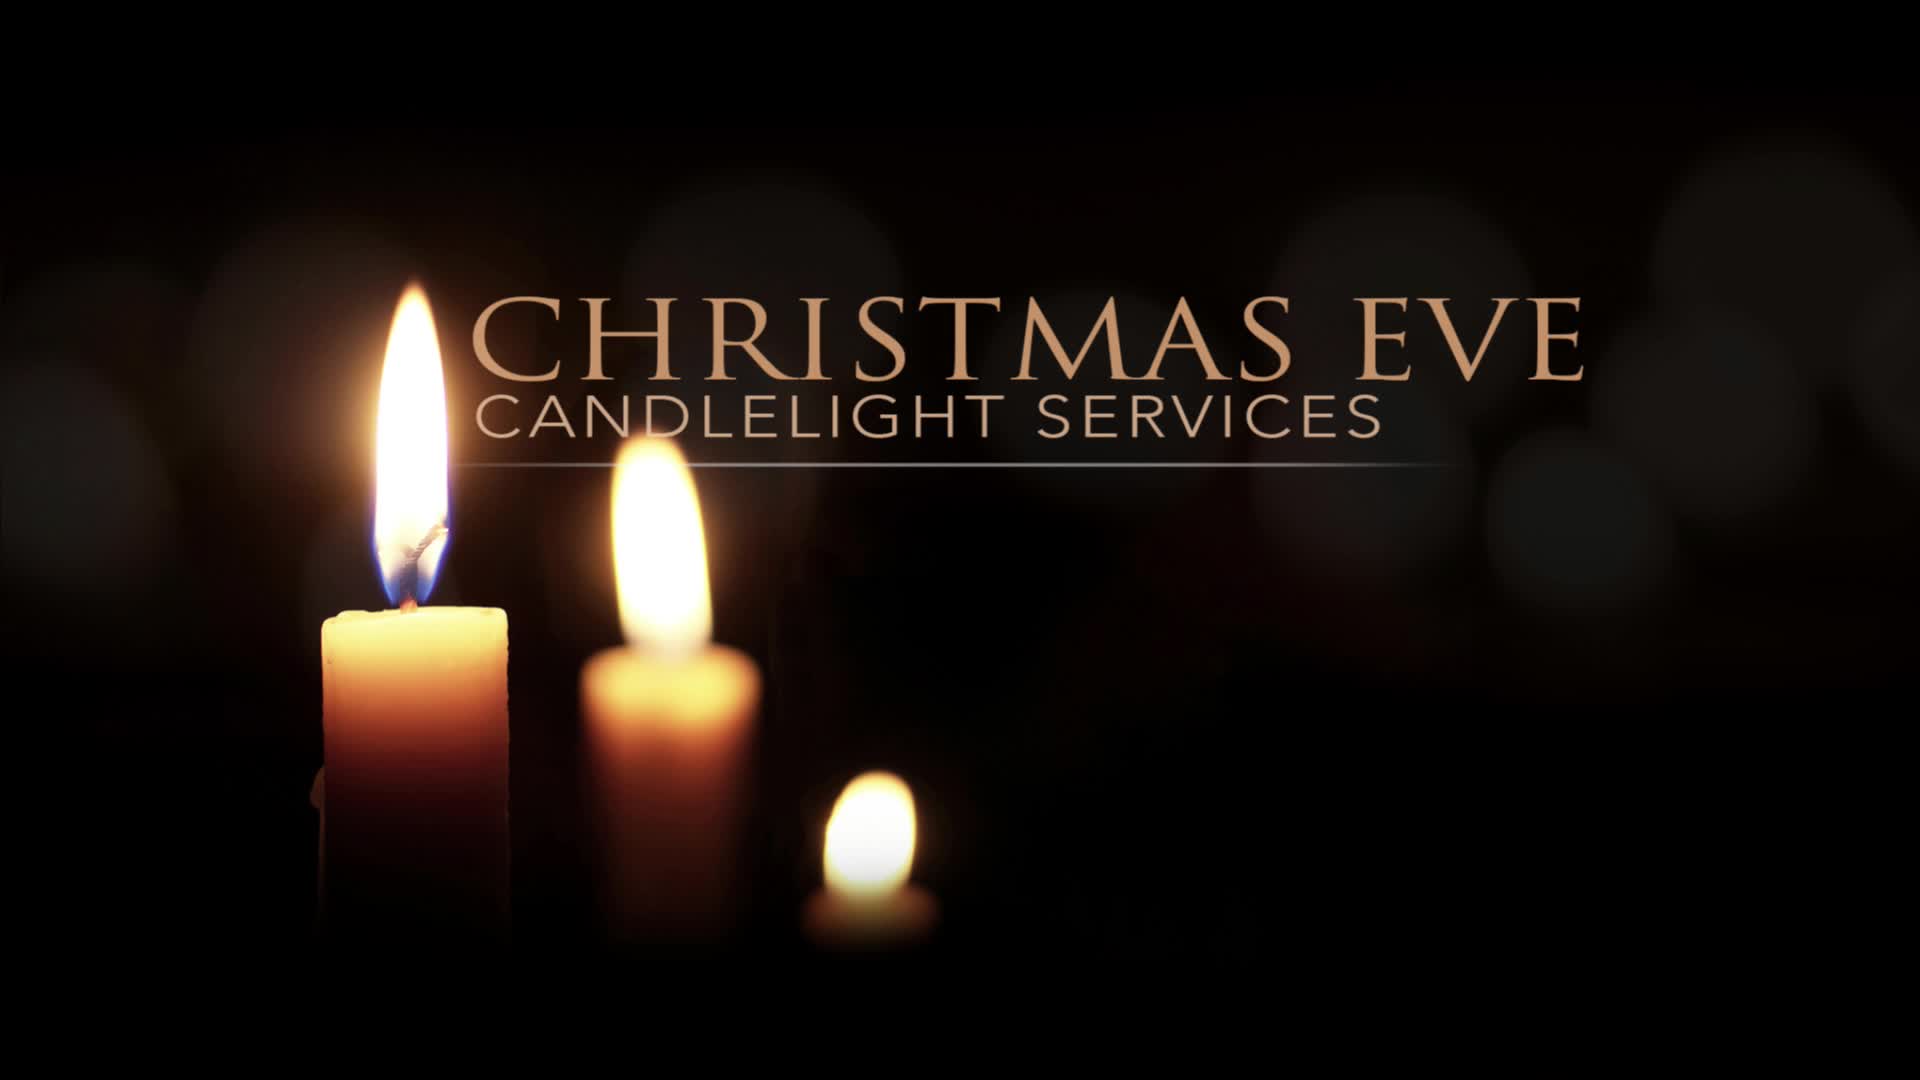 Christmas Eve 2021 Candlelight Service 11 pm